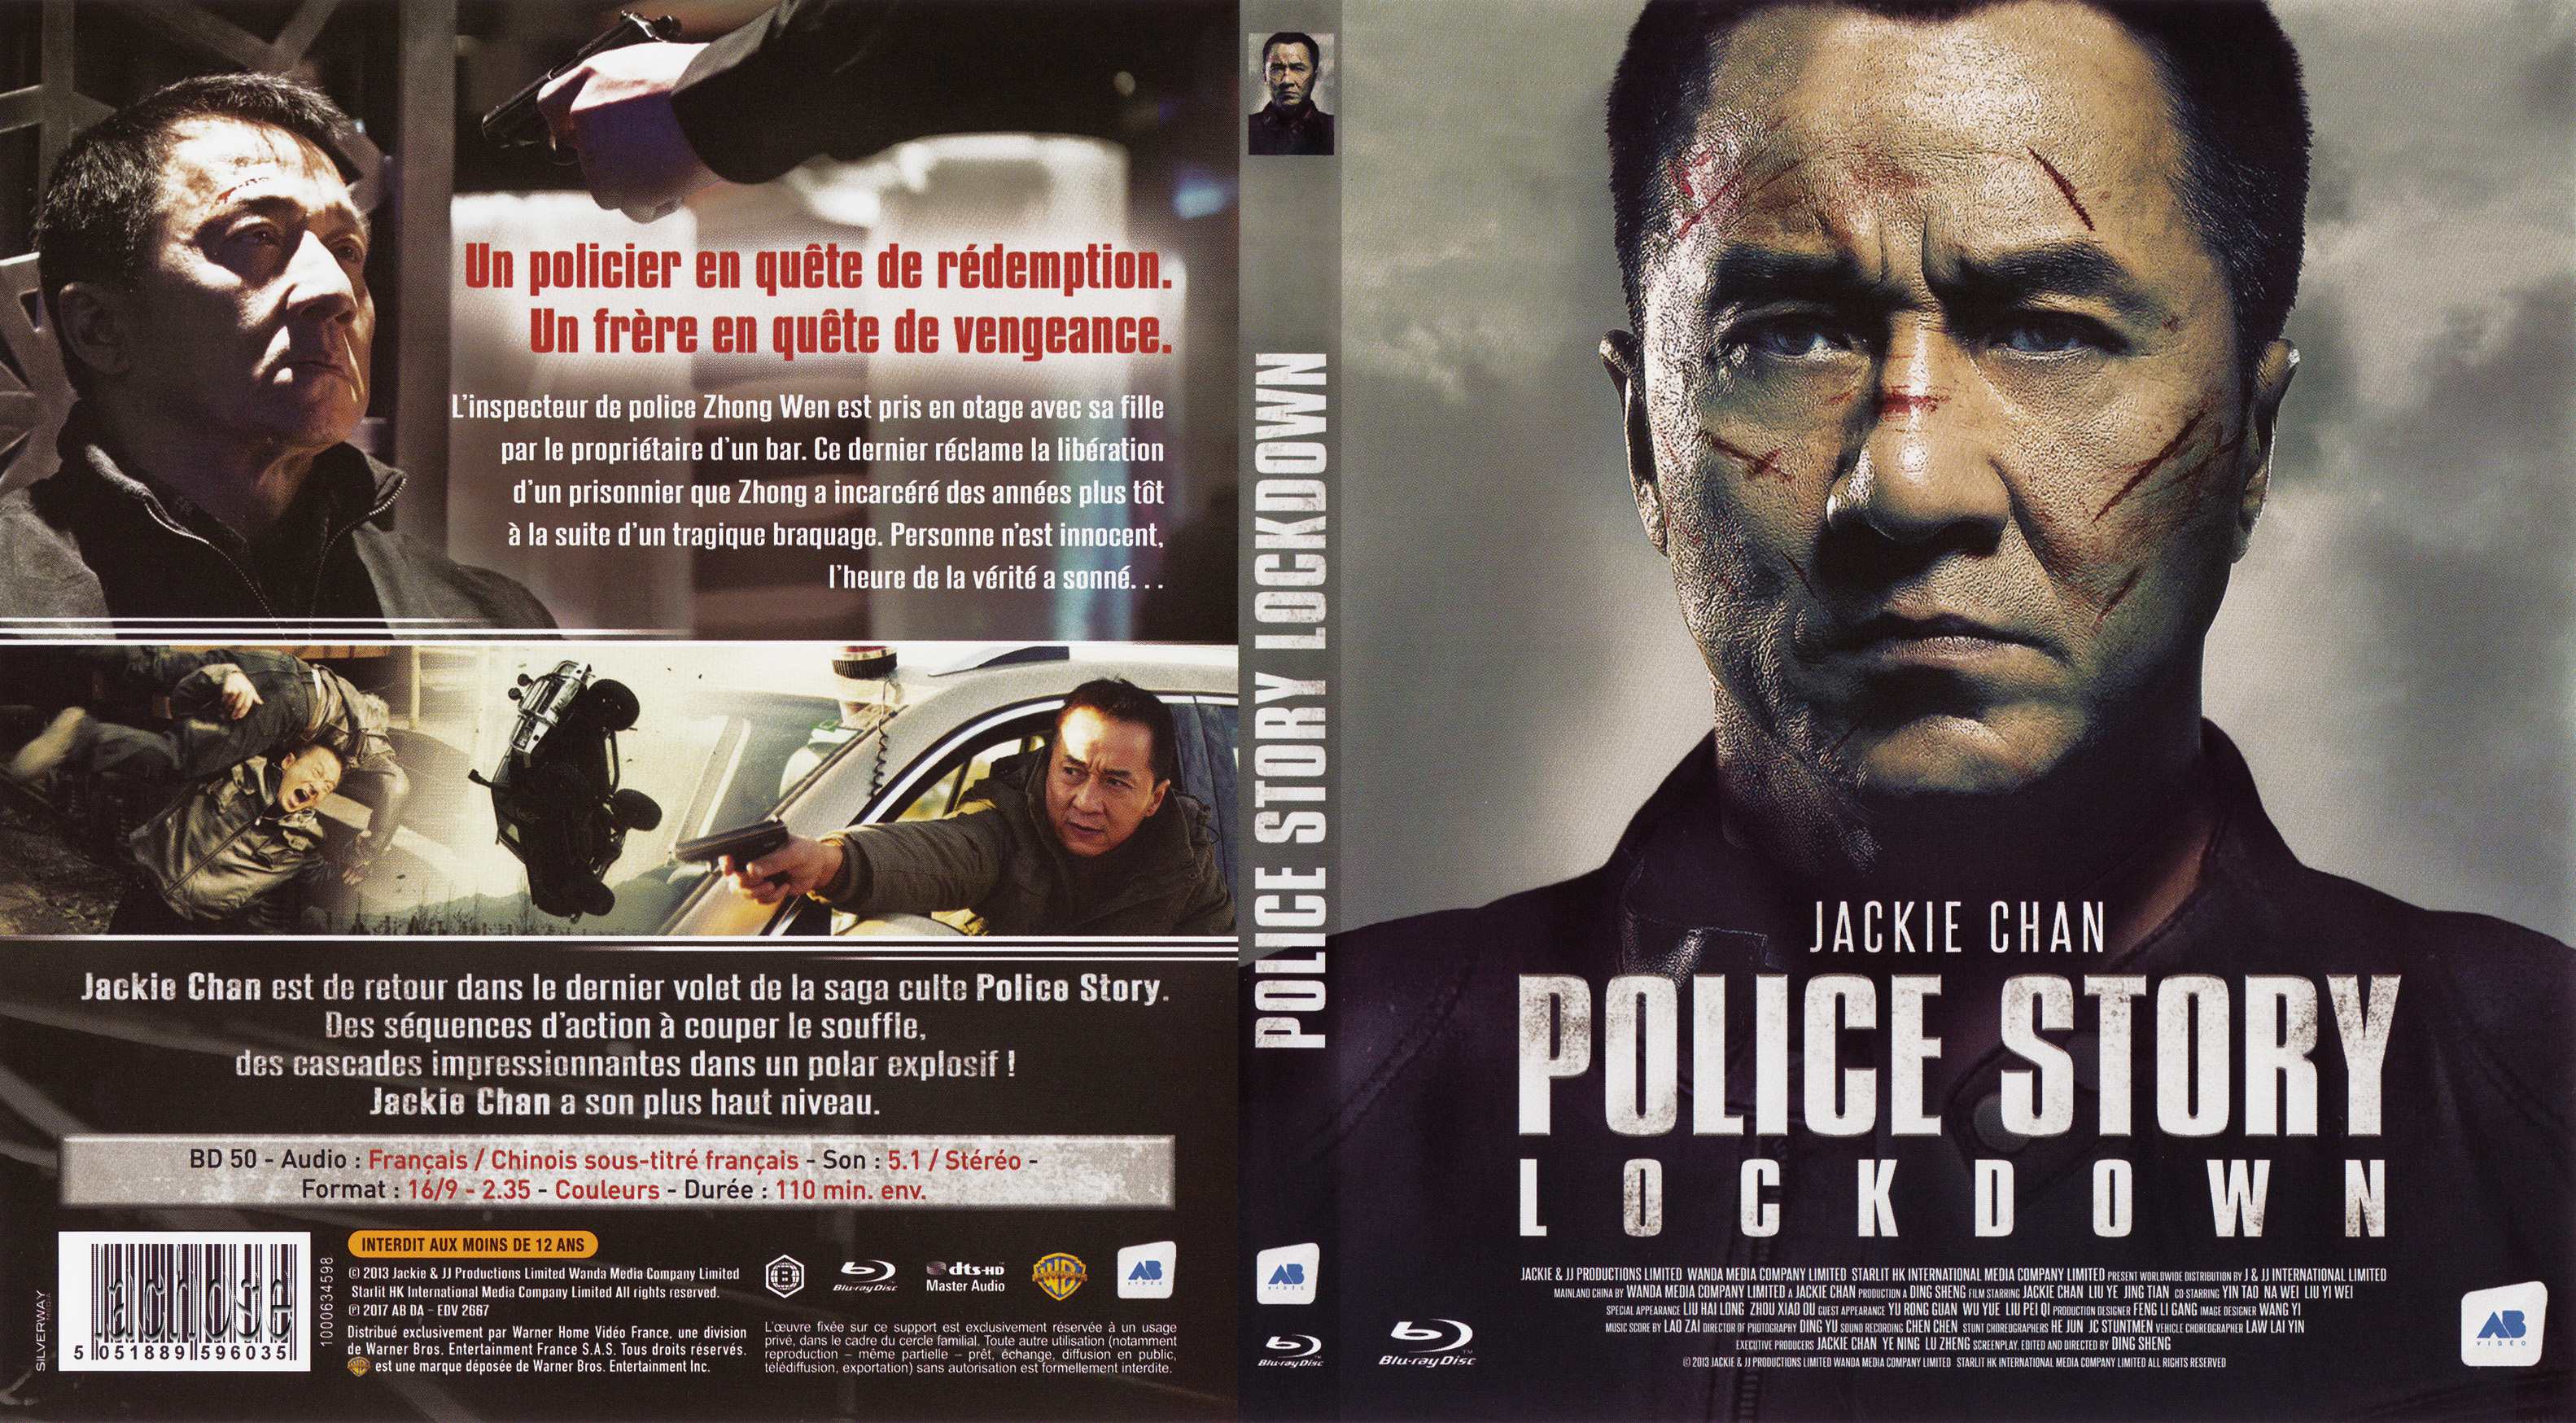 Jaquette DVD Police story lockdown (BLU-RAY)